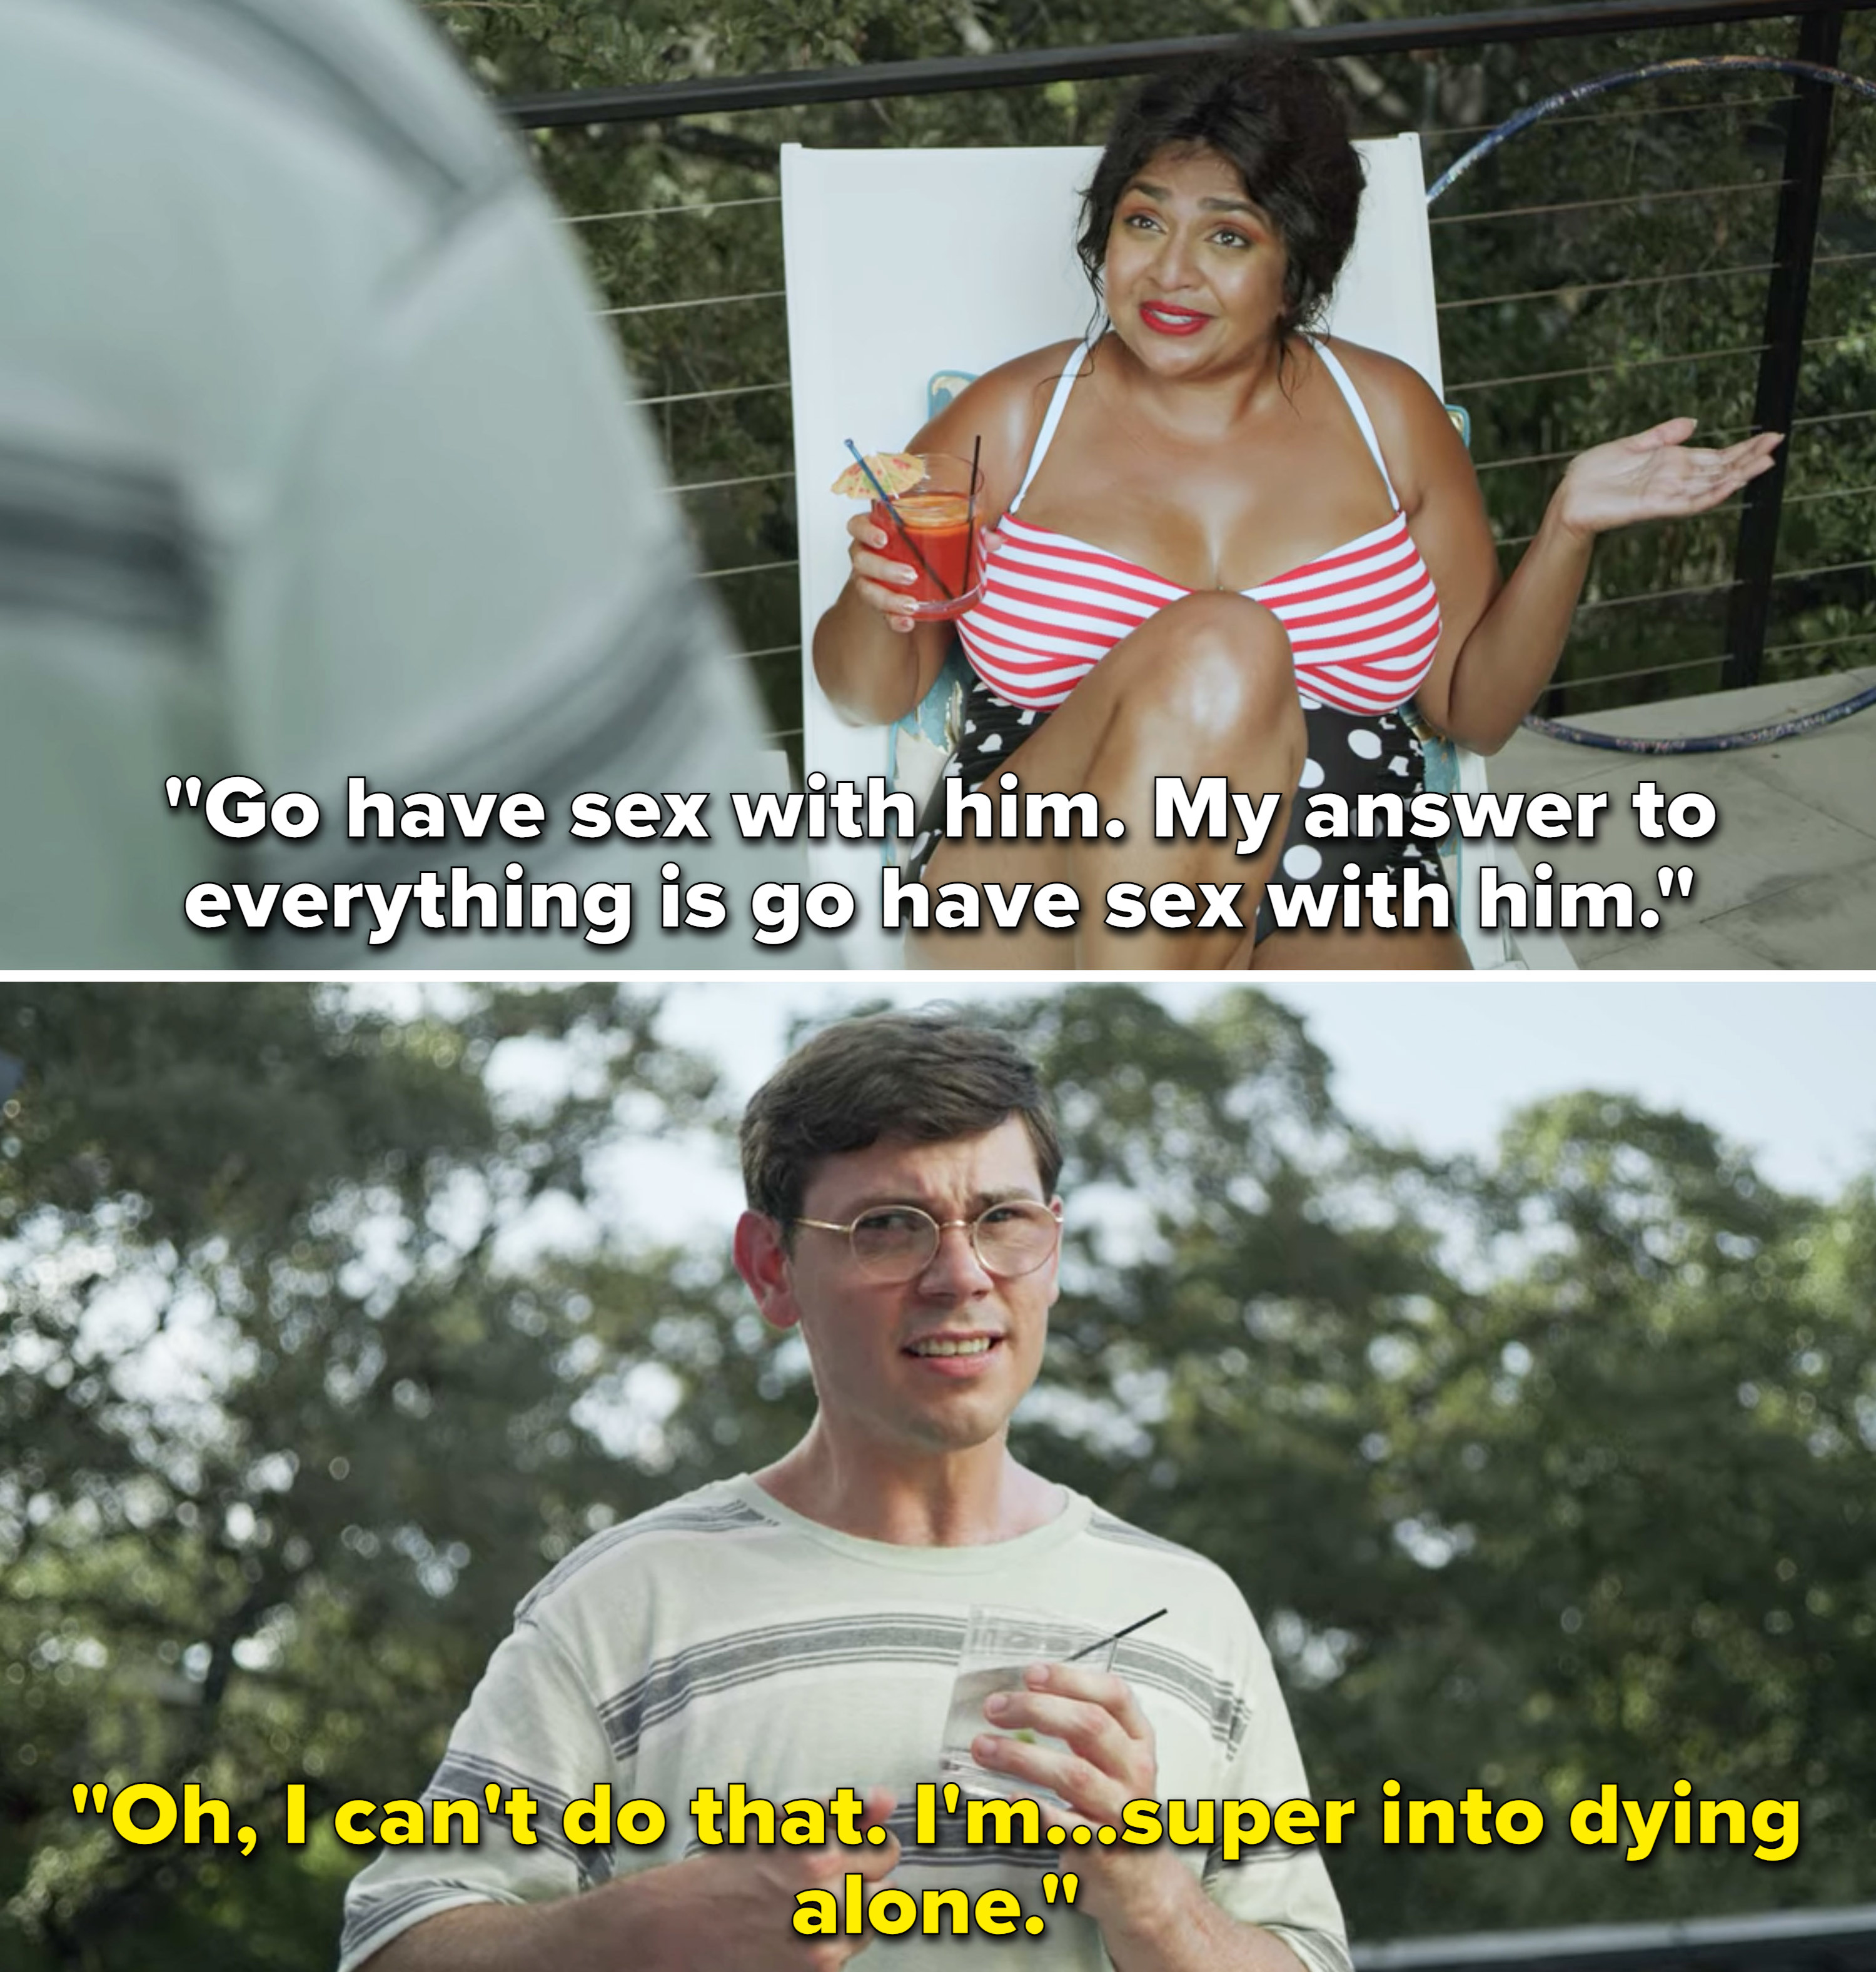 Ryan saying he can&#x27;t have sex with someone because he&#x27;s &quot;super into dying alone&quot;